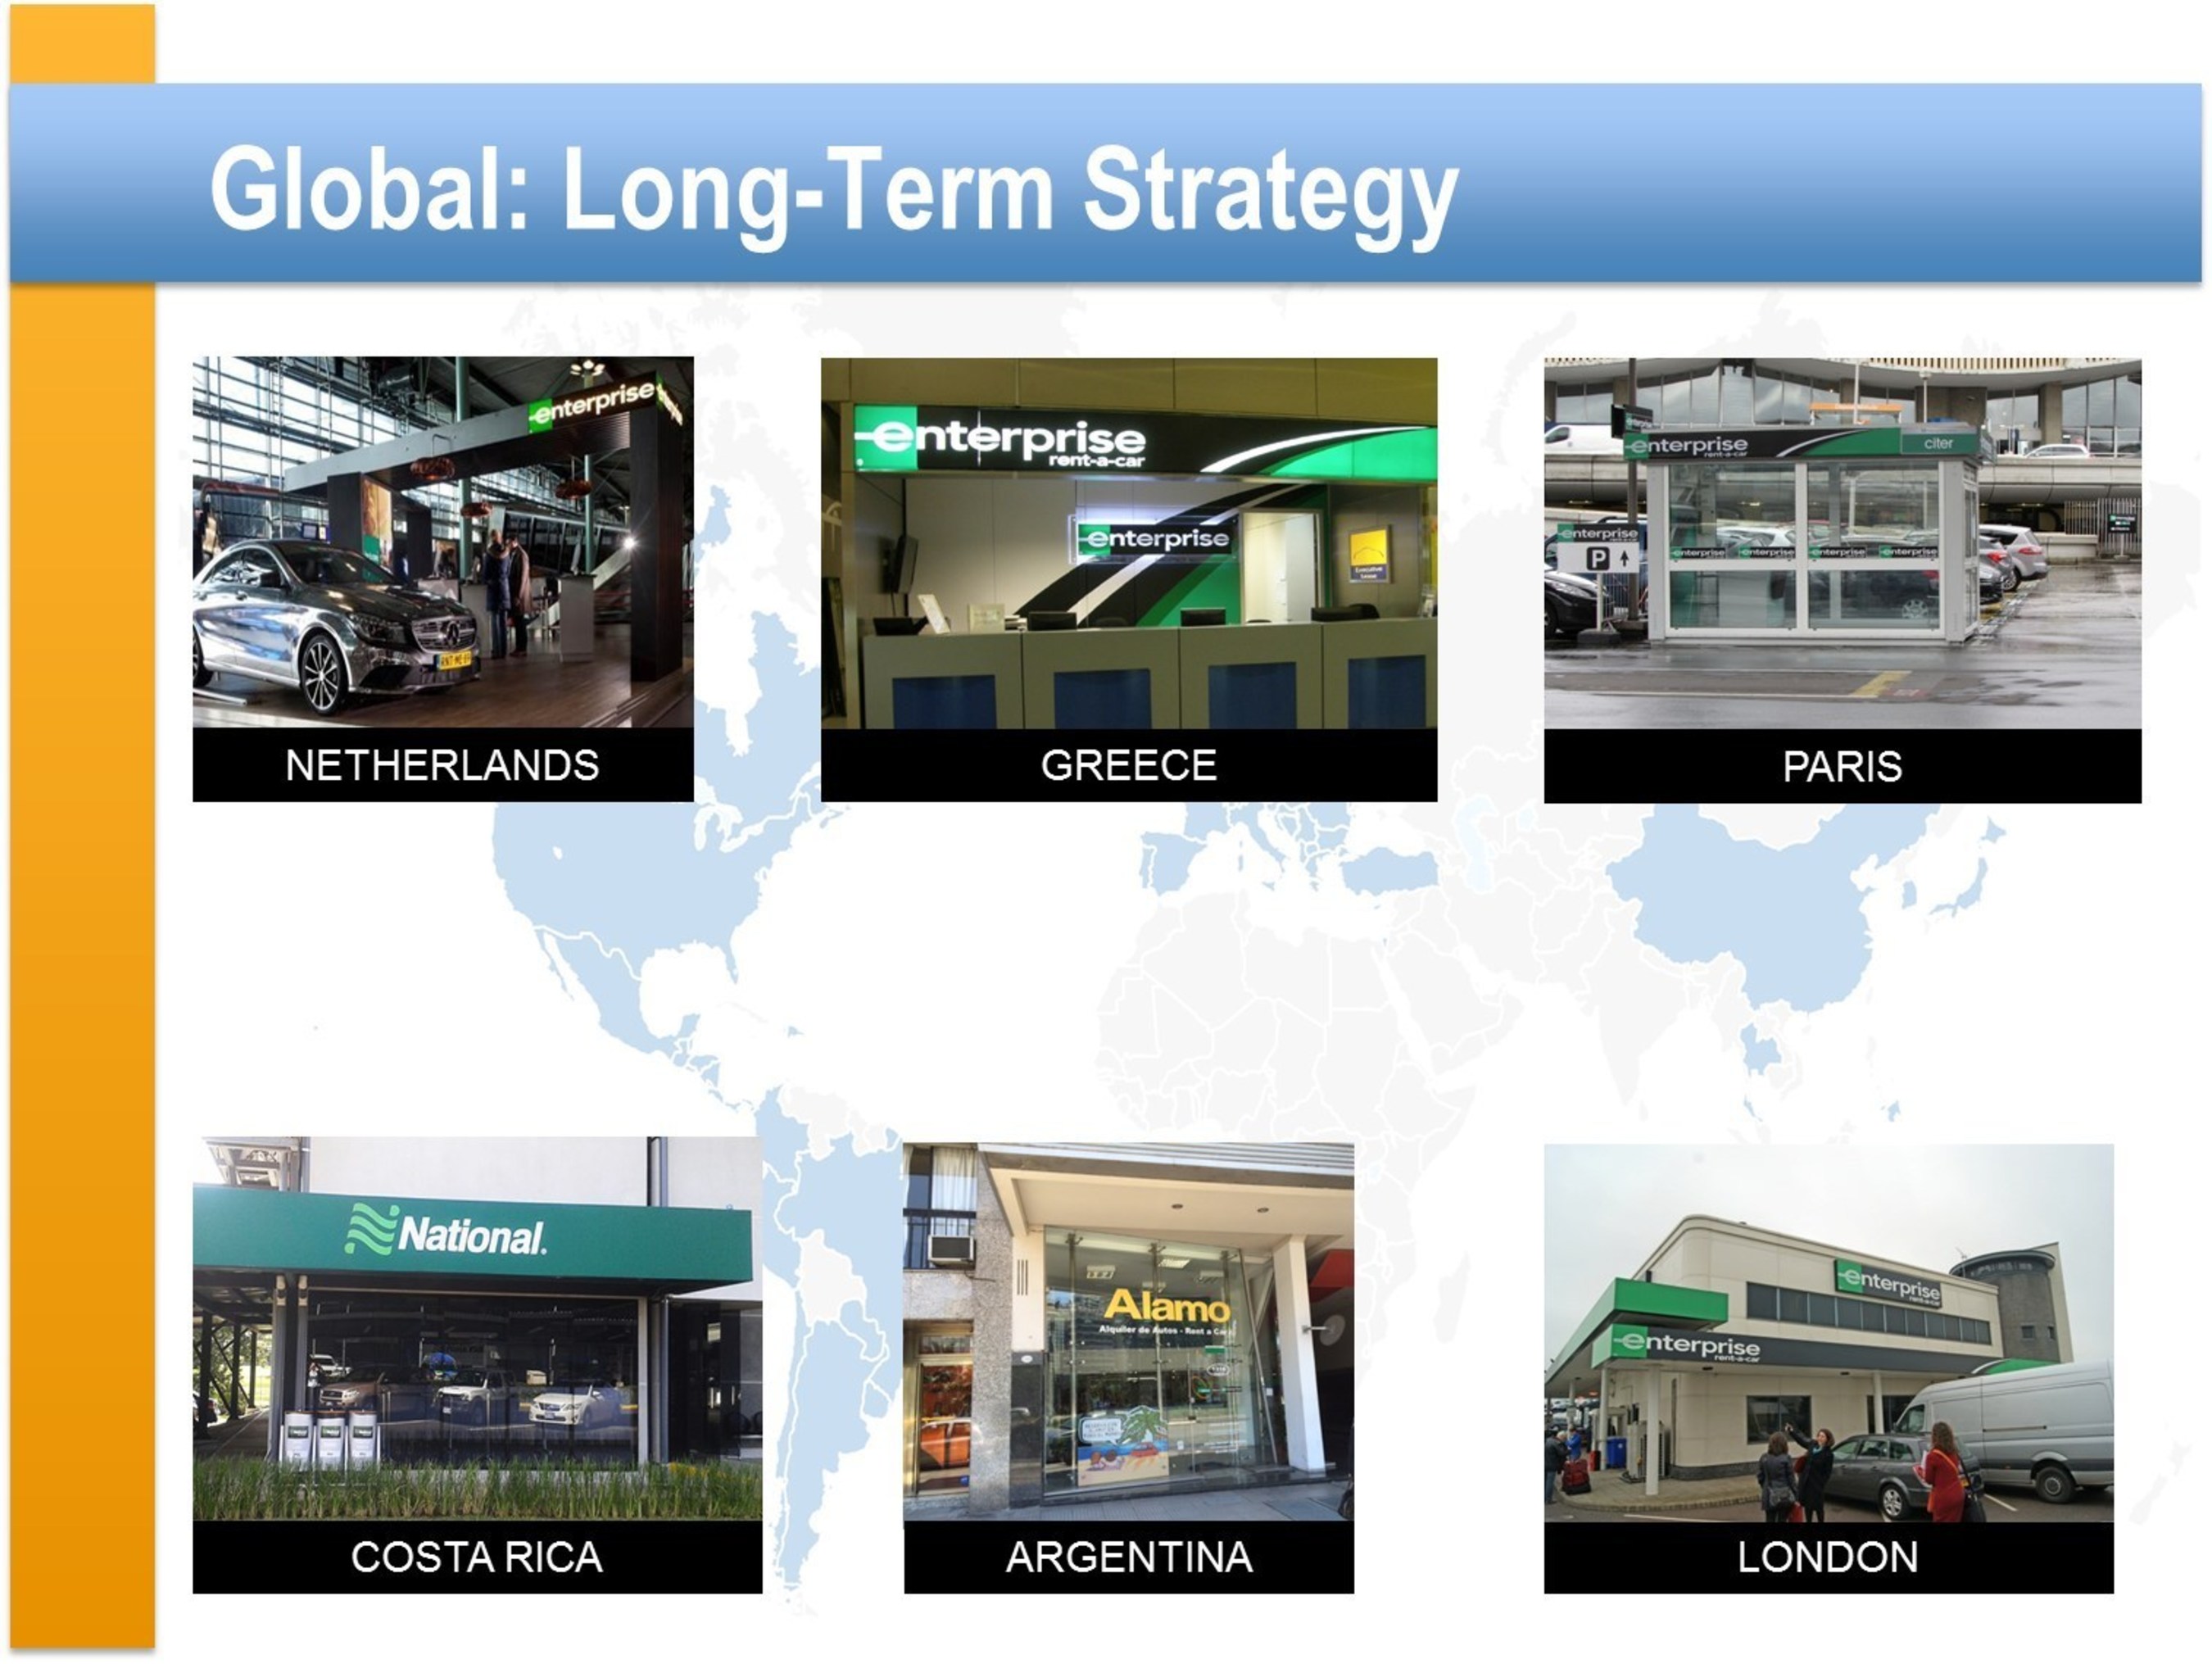 Enterprise Holdings - the largest car rental company in the world - owns and operates National Car Rental and Alamo Rent A Car, as well as the flagship Enterprise Rent-A-Car brand, with more than 8,600 locations in 70 countries.